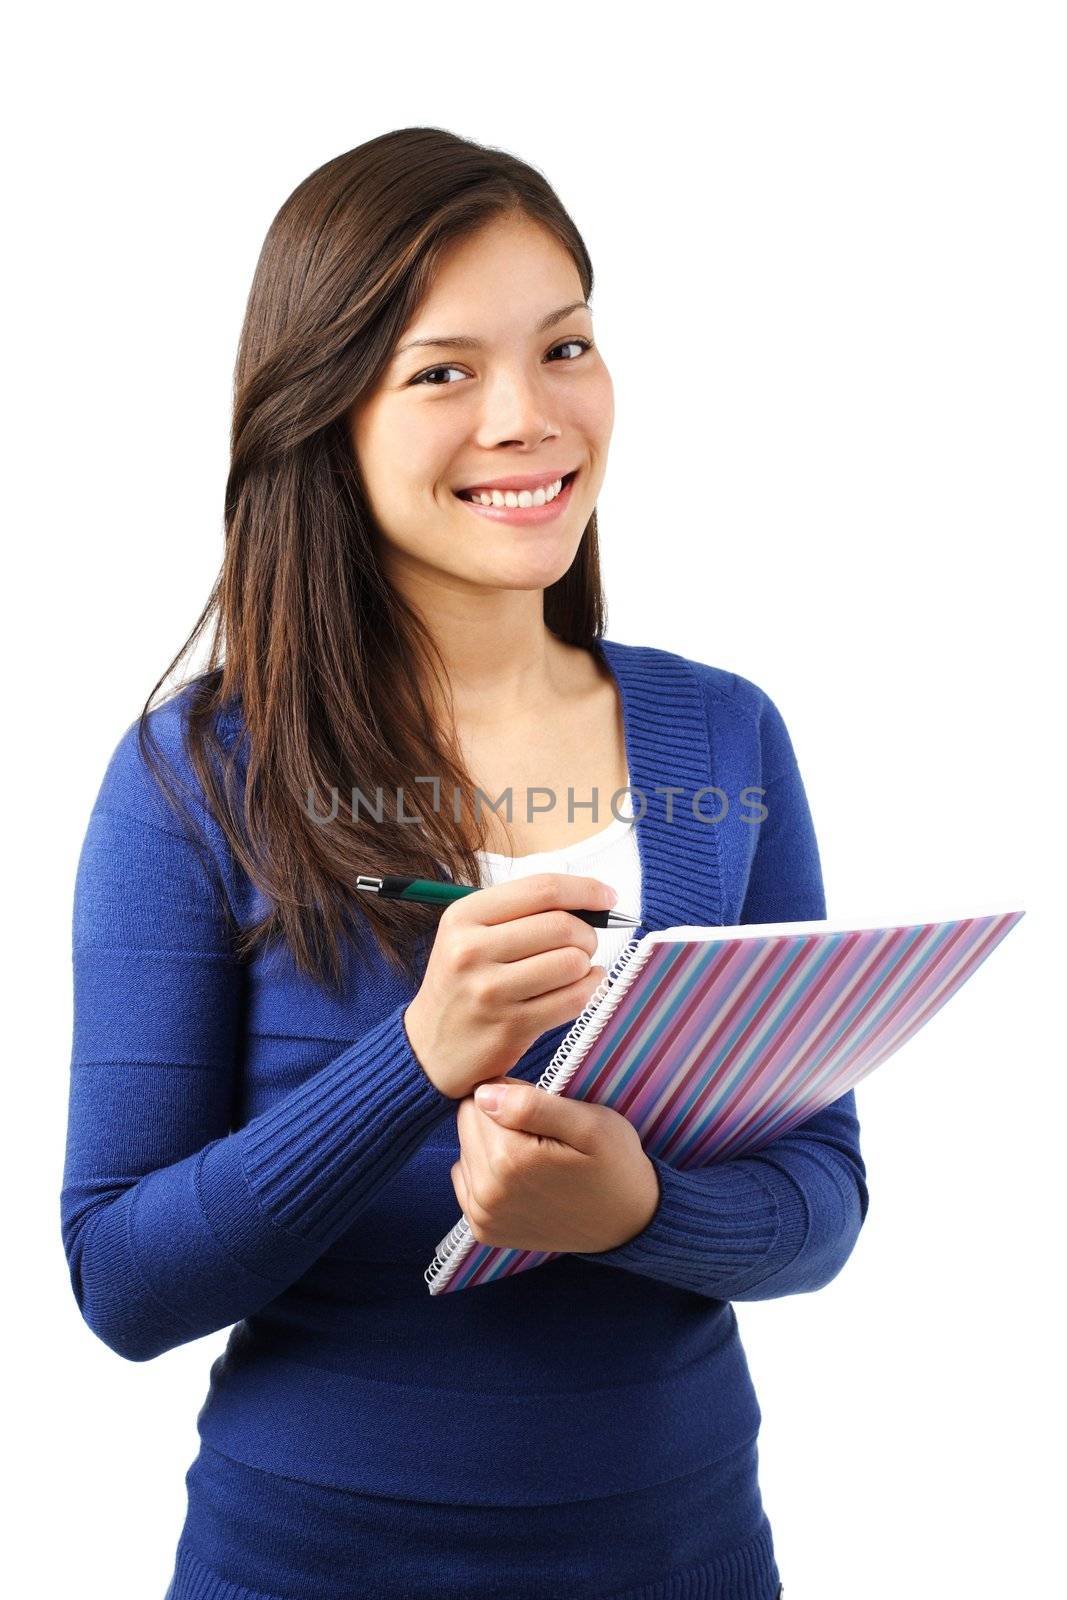 Woman university student writing in notebooks. Isolated on white background.